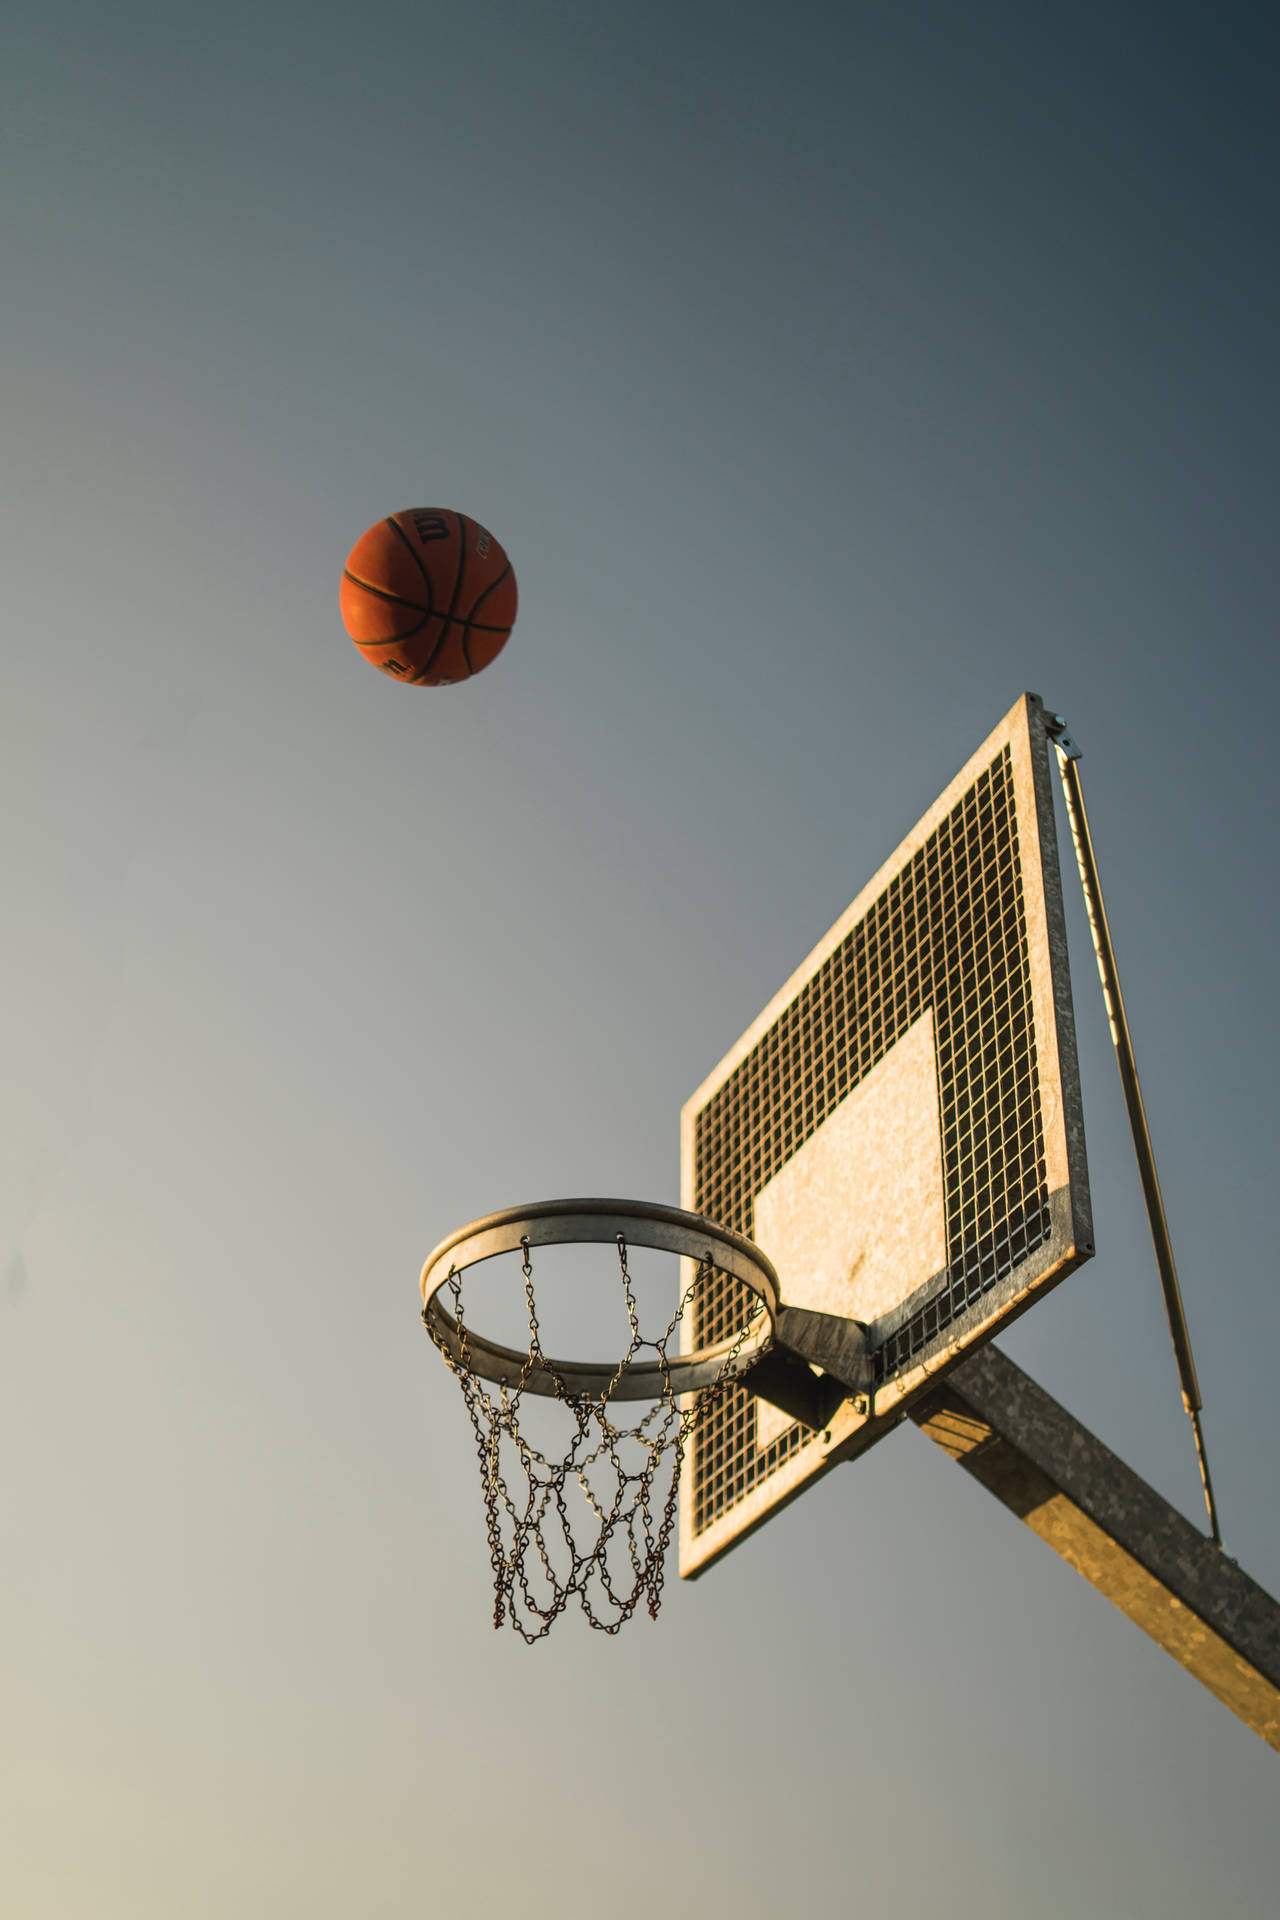 4363X6542 Basketball Wallpaper and Background